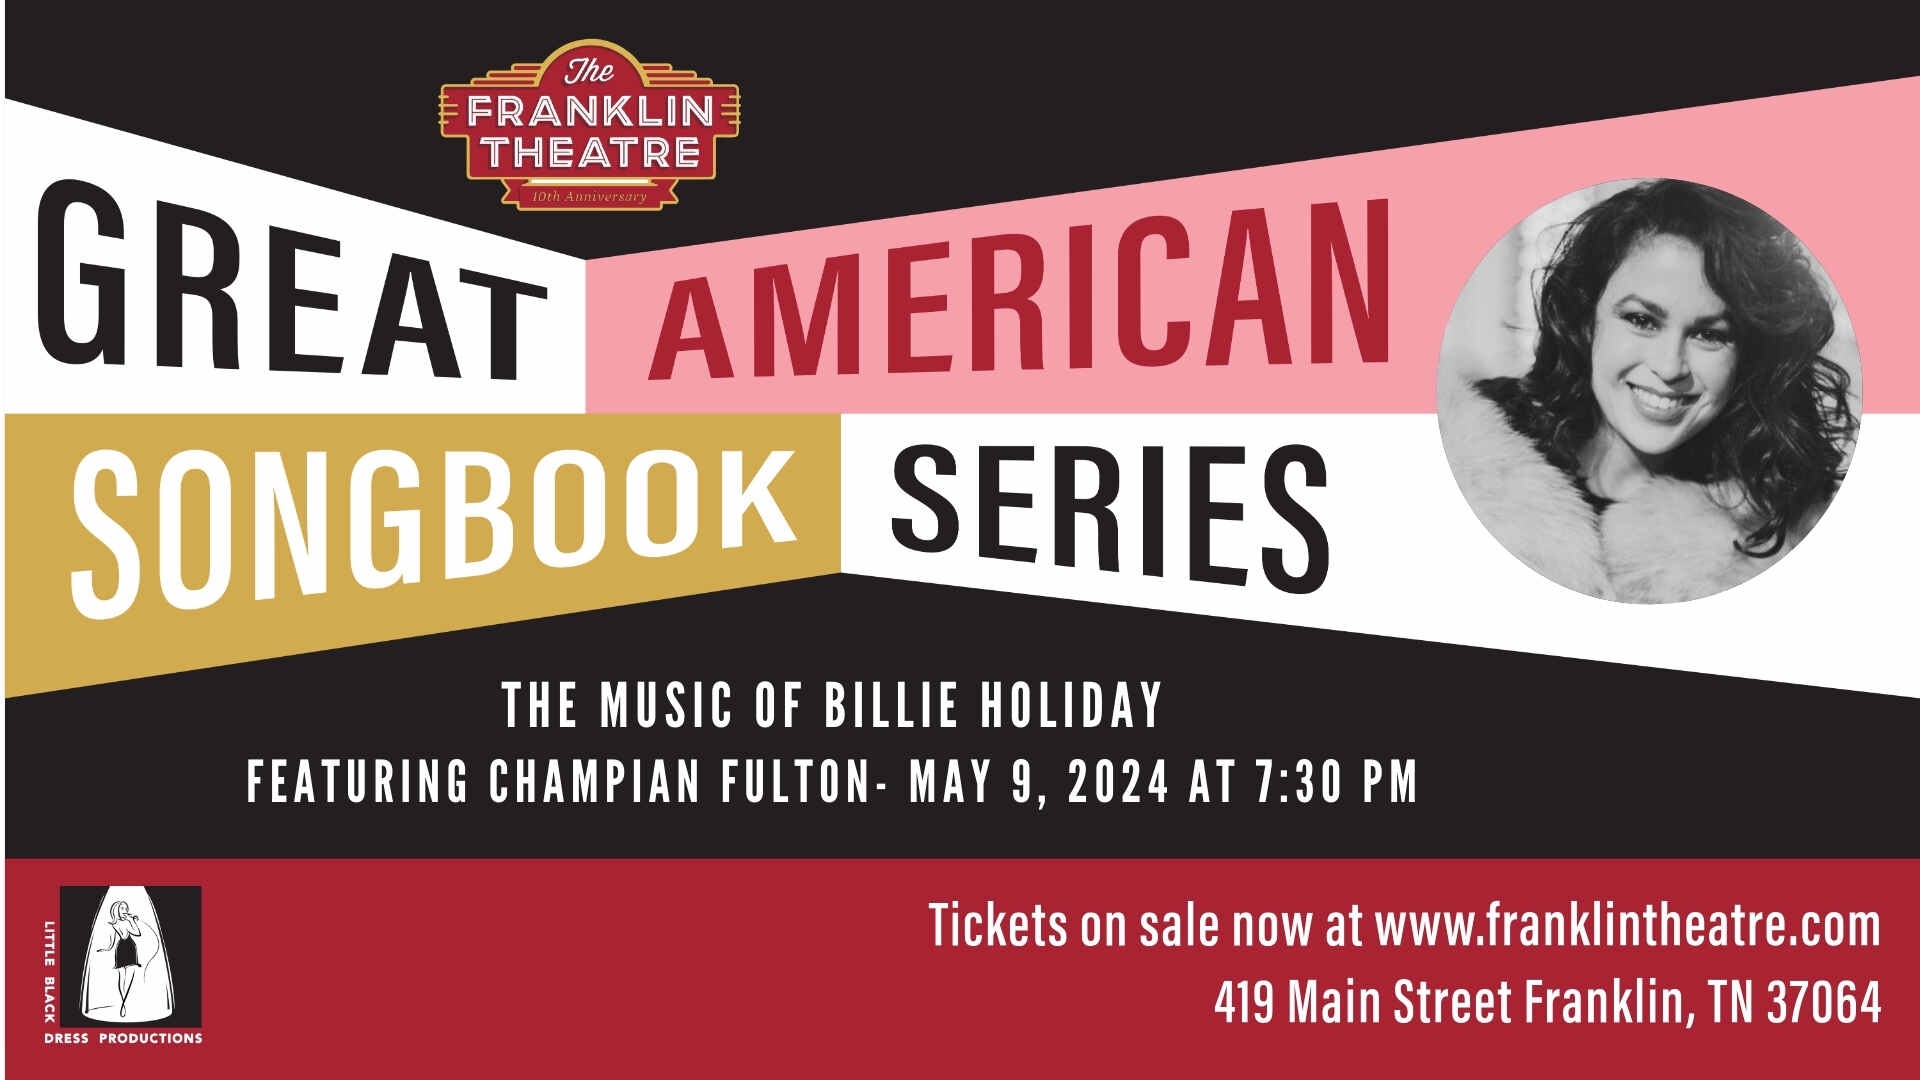 The Music of Billie Holiday featuring Champian Fulton_Franklin Theatre